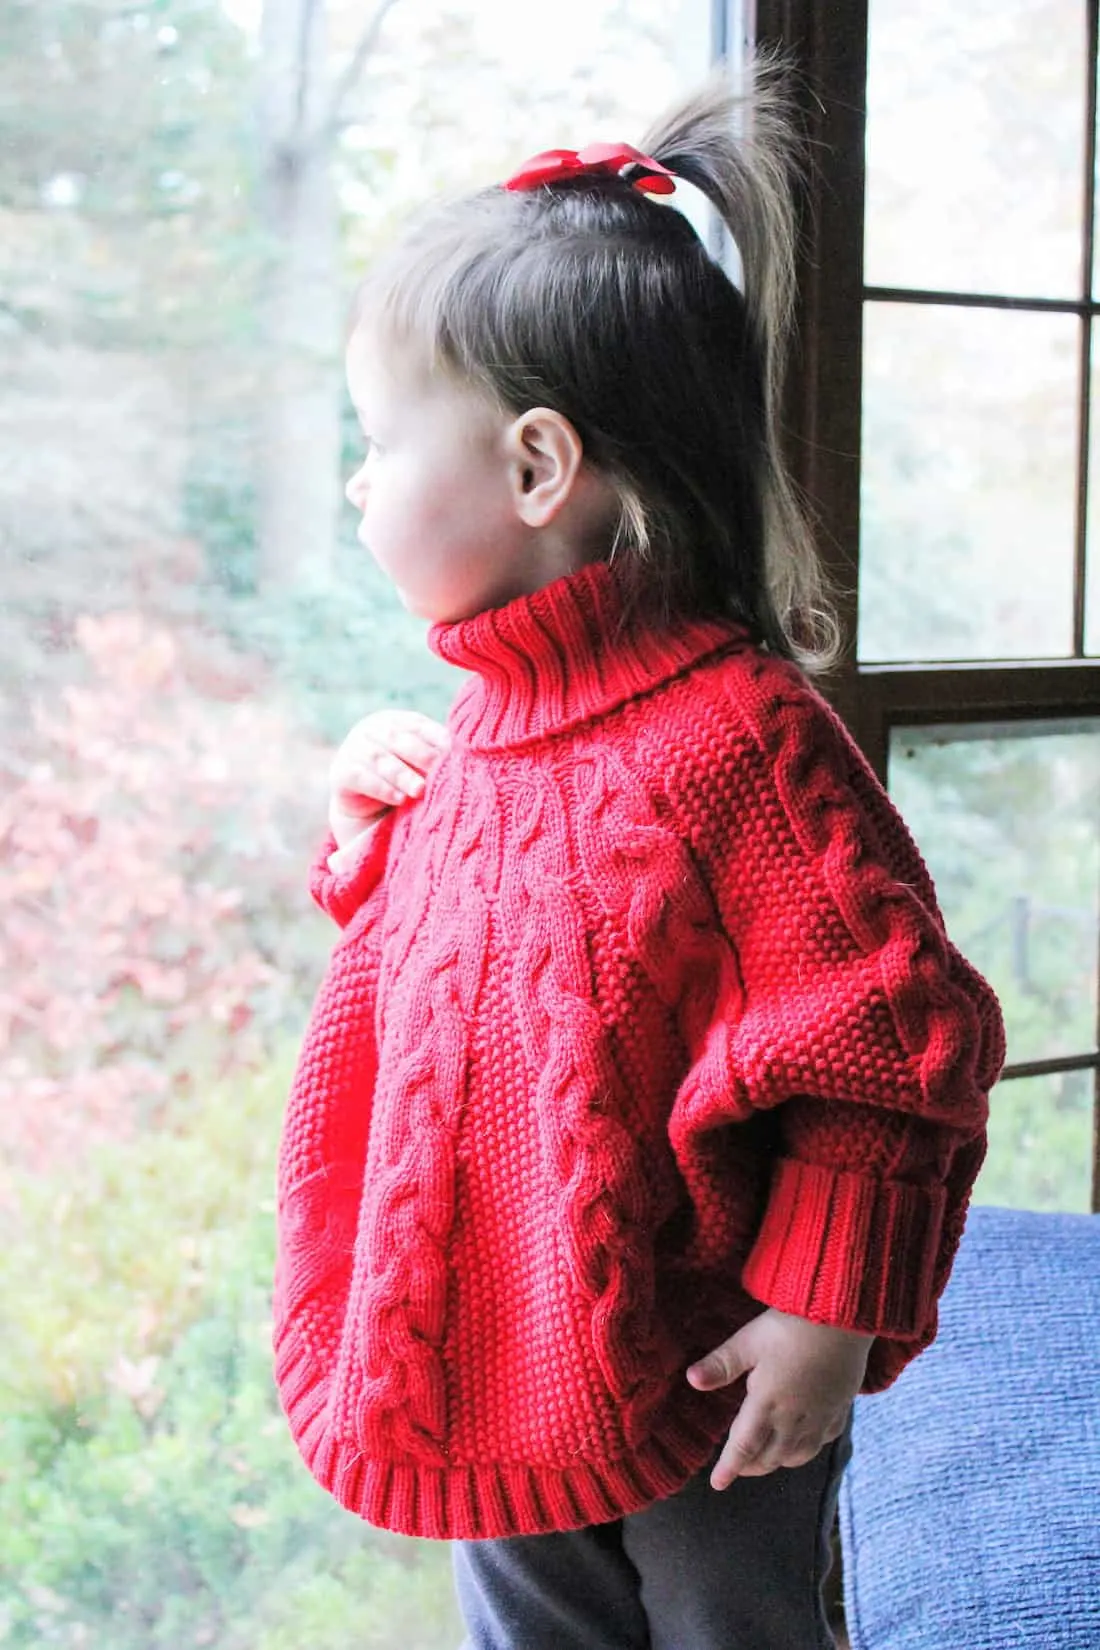 Toddler girl in red holiday sweater looks through window.